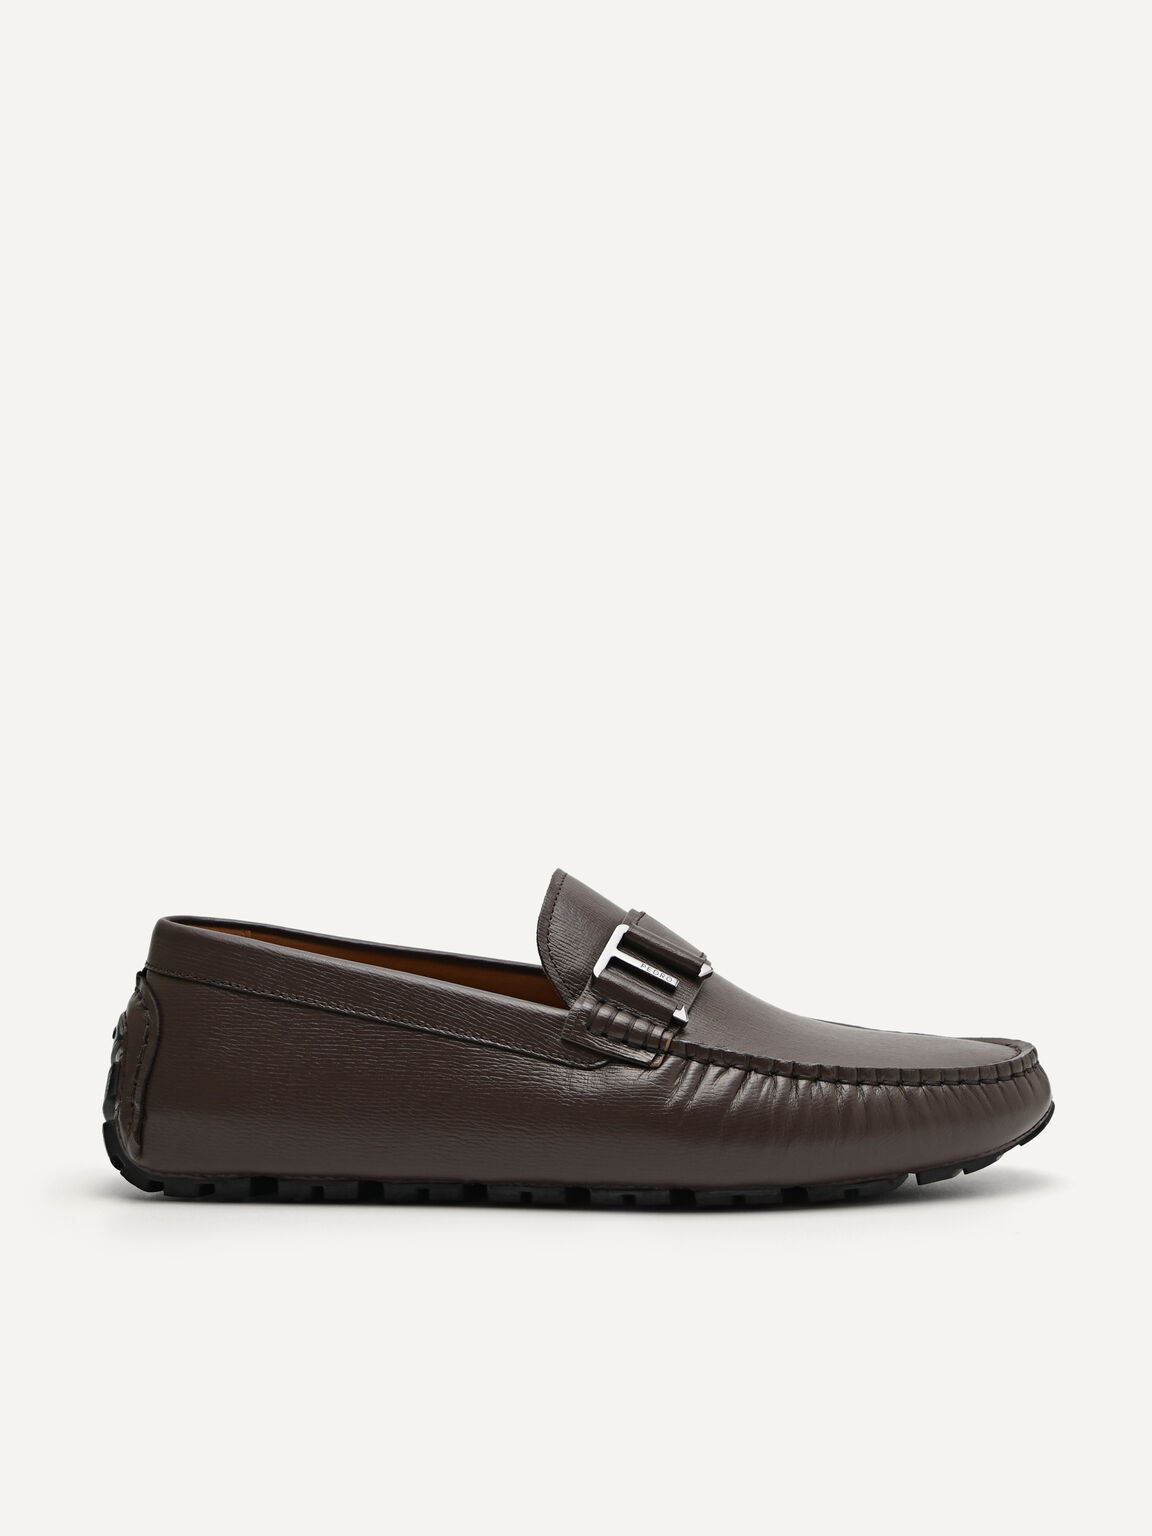 Leather Driving Moccassins, Dark Brown